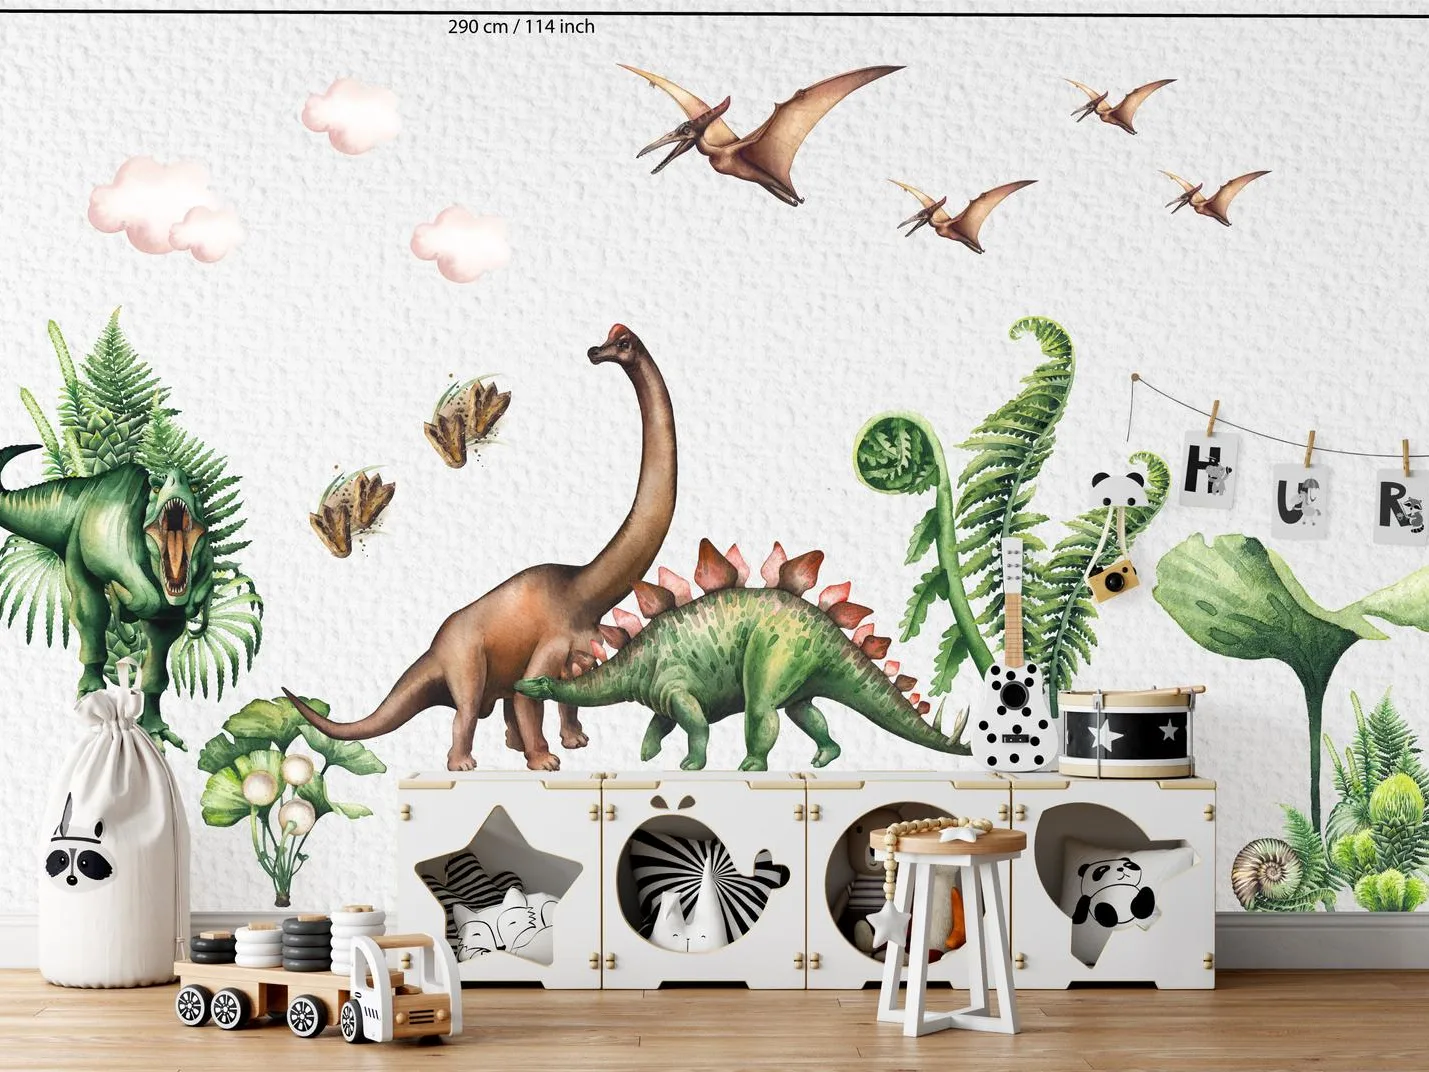 Jurassic Joy: Decorating Kids’ Rooms with Dinosaur Wall Decals